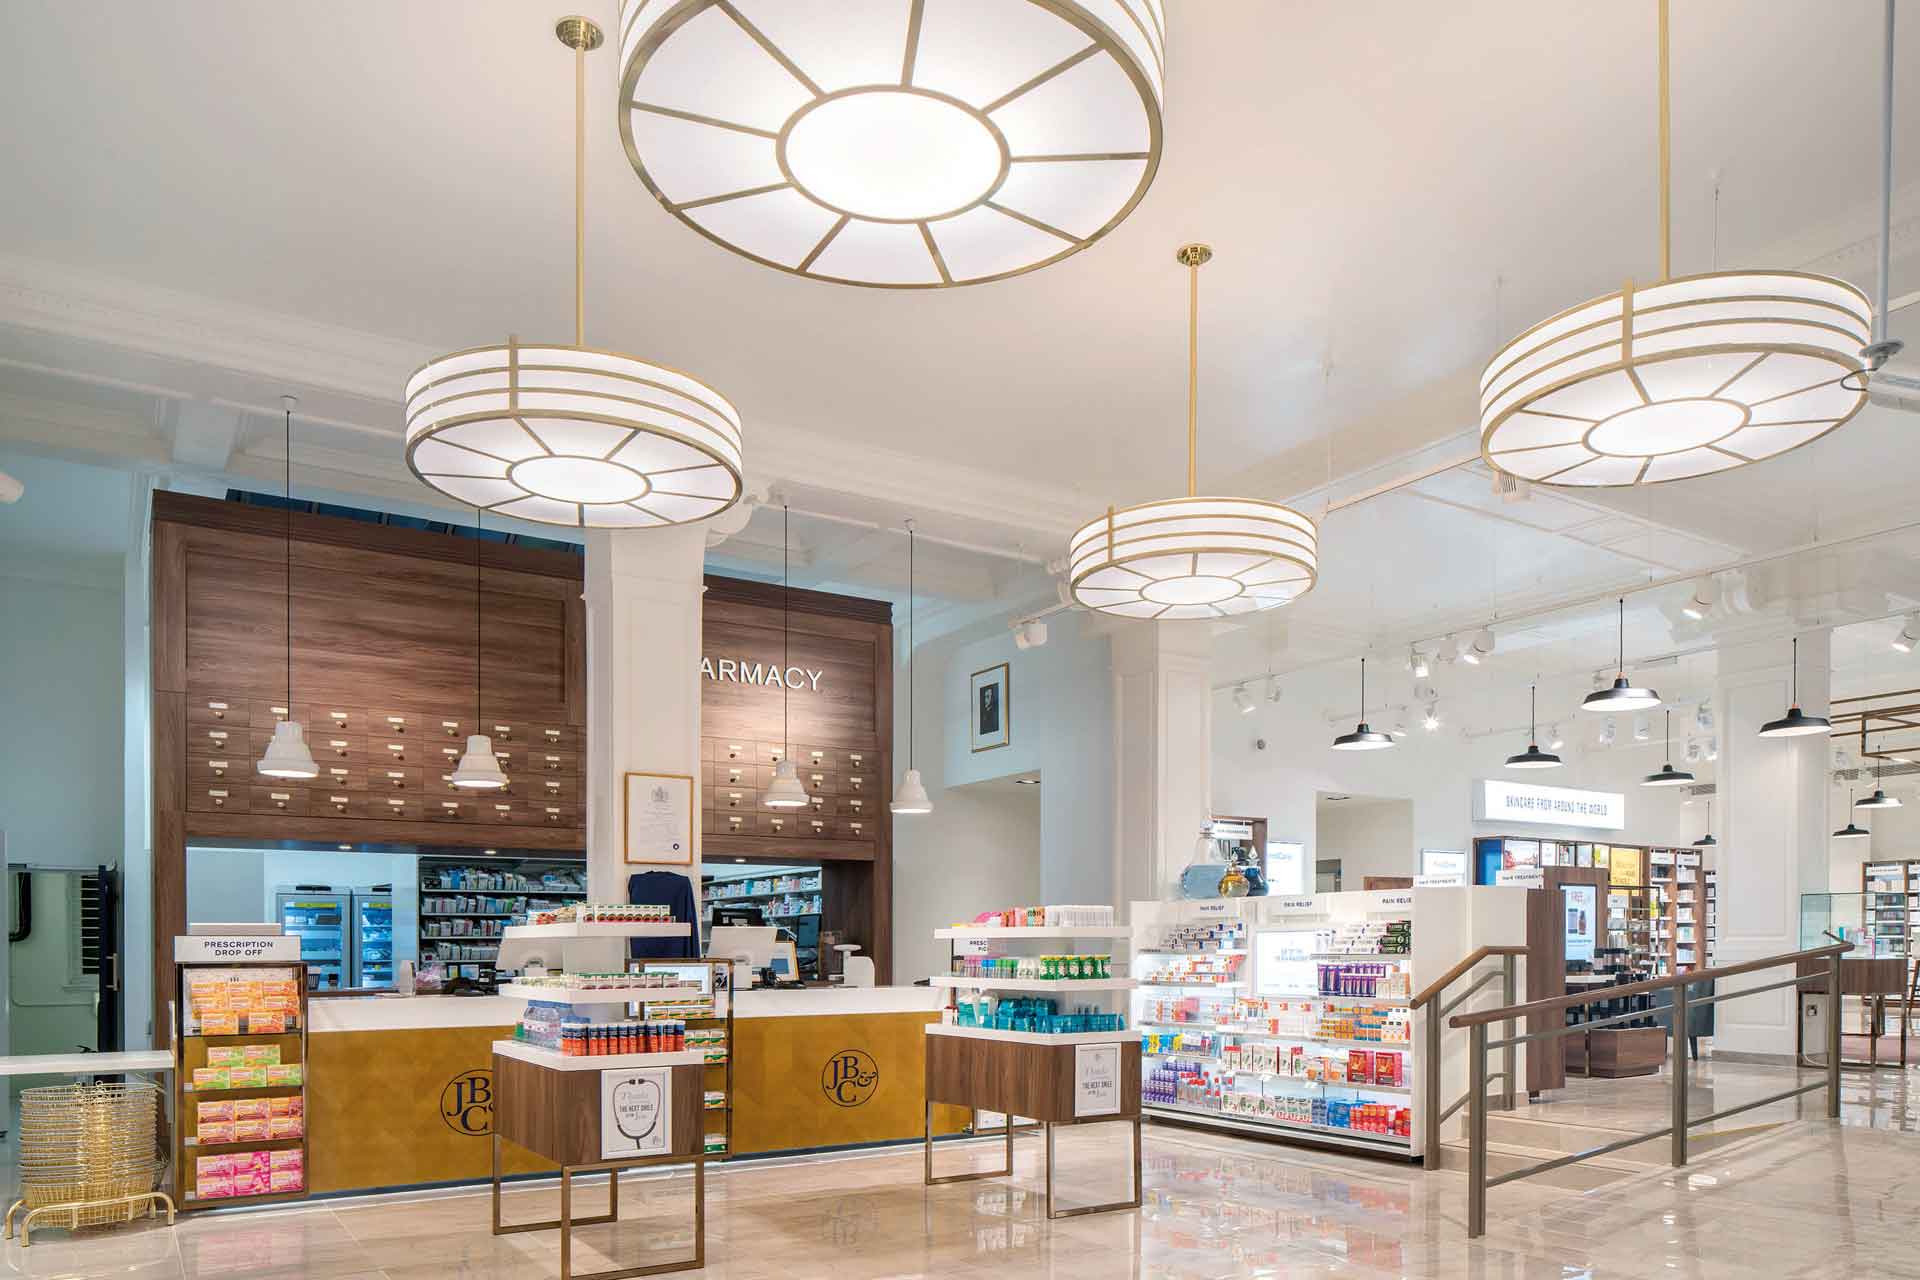 How John Bell & Croyden Is Rediscovering Its Trusted Pharmacy Touch